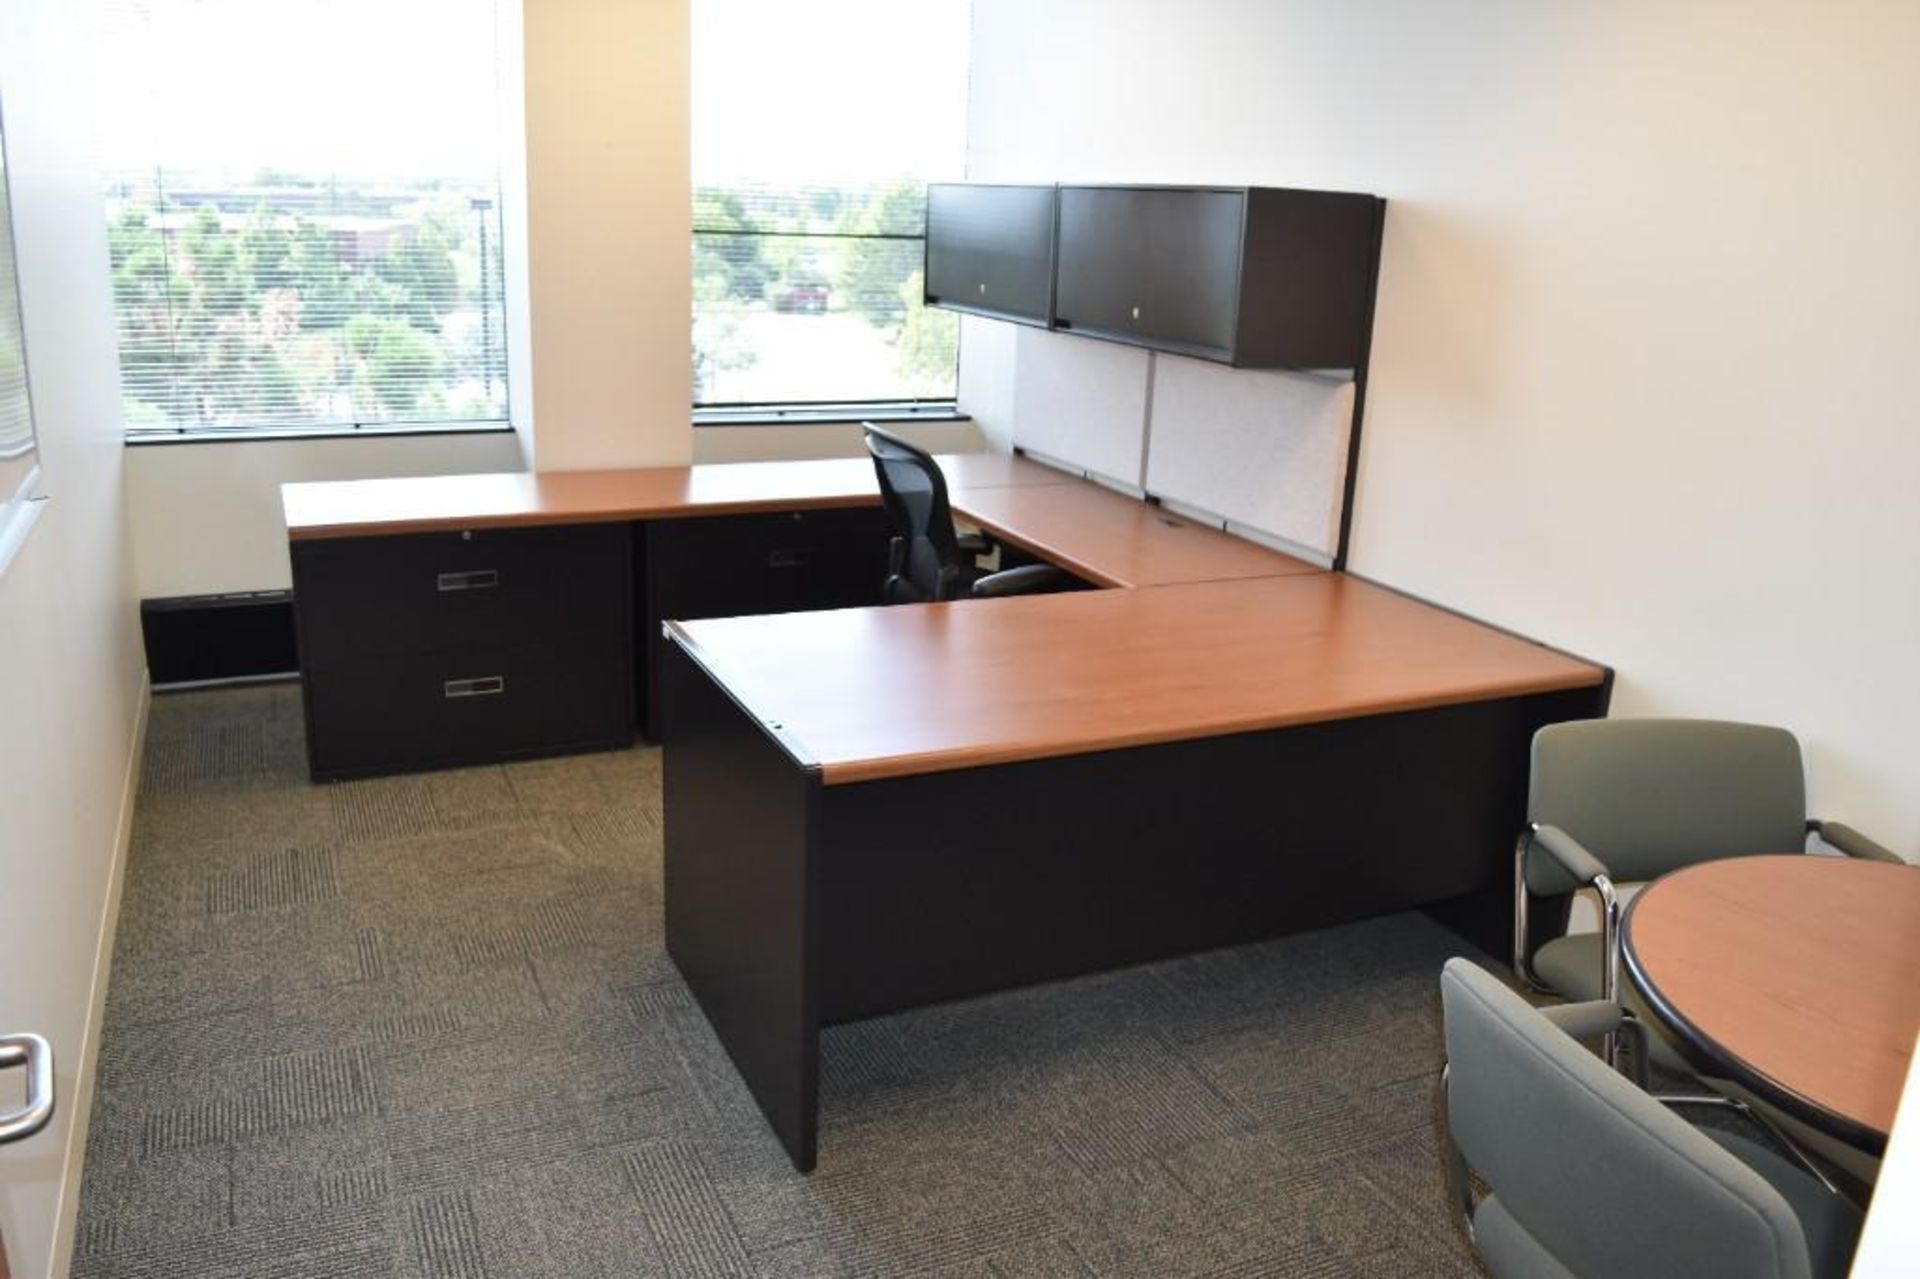 Lot c/o: (26) Assorted Office Suites - Relocated for ease of removal - Image 96 of 106